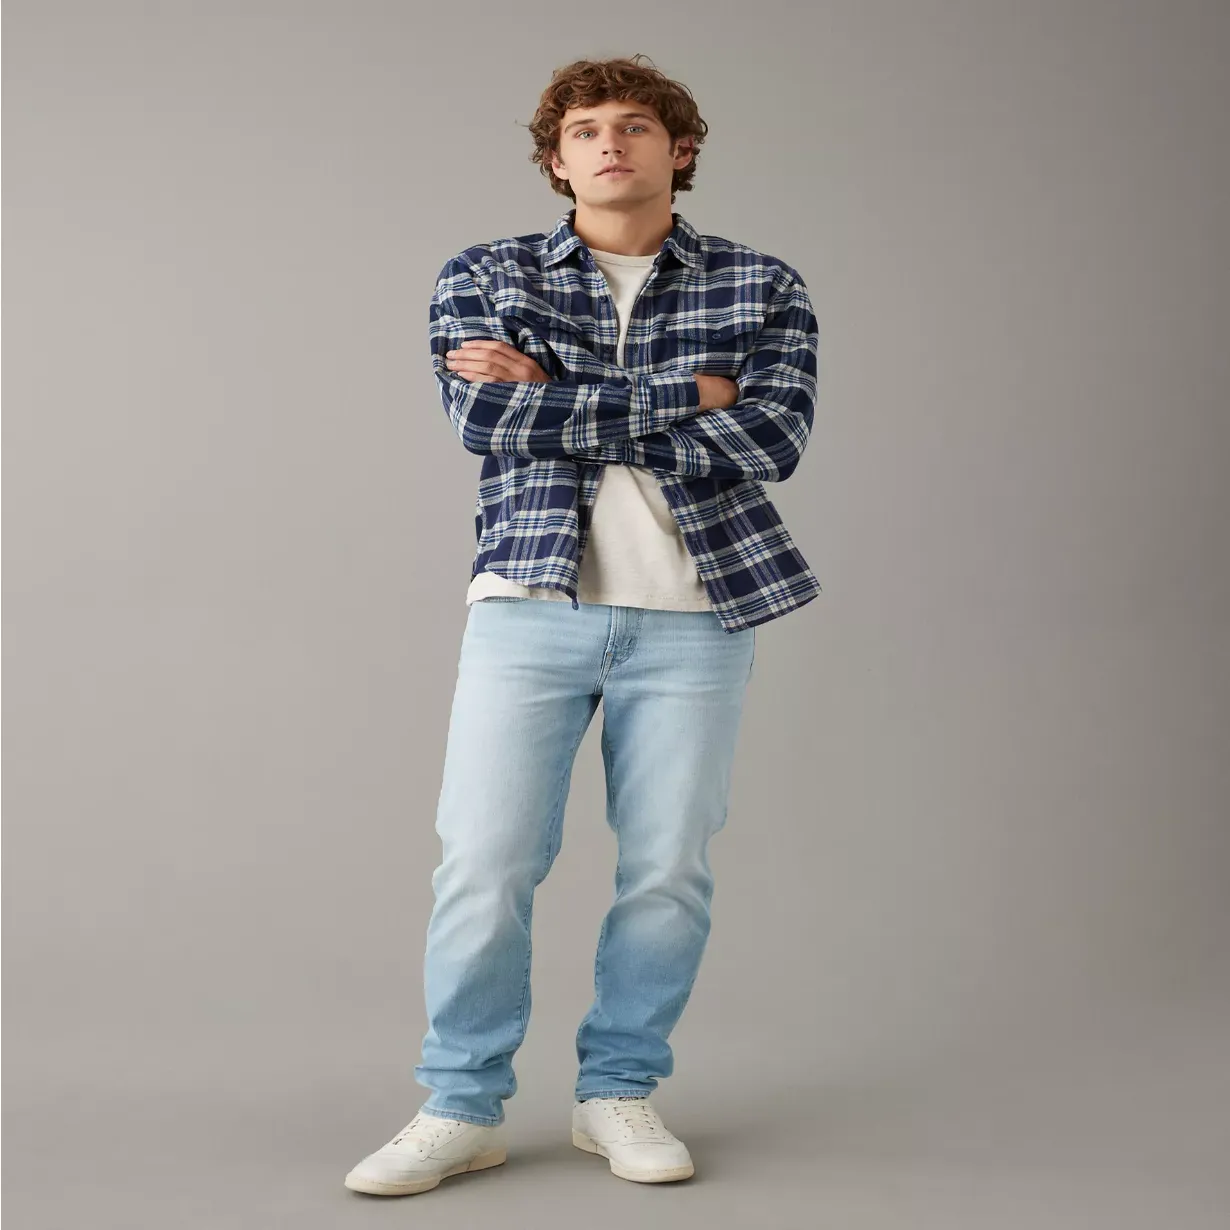 A man wearing a blue and white plaid shirt, white t-shirt, light blue jeans, and white sneakers.